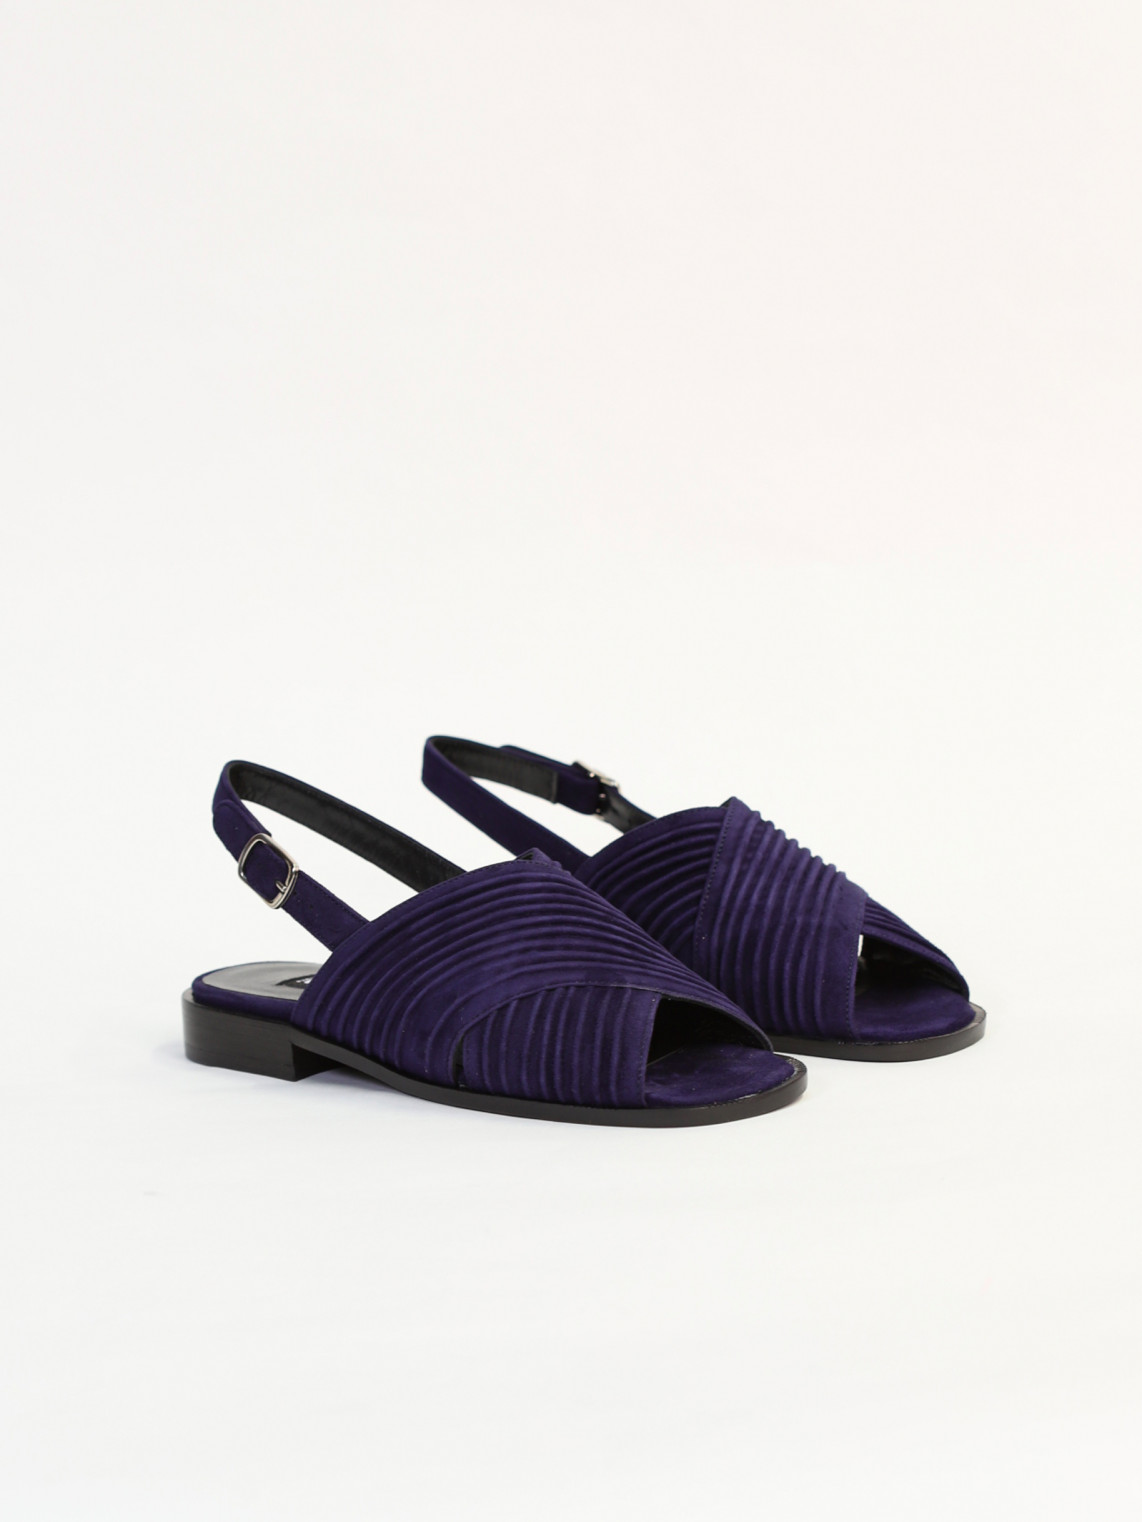 Blue suede pleated leather sandals